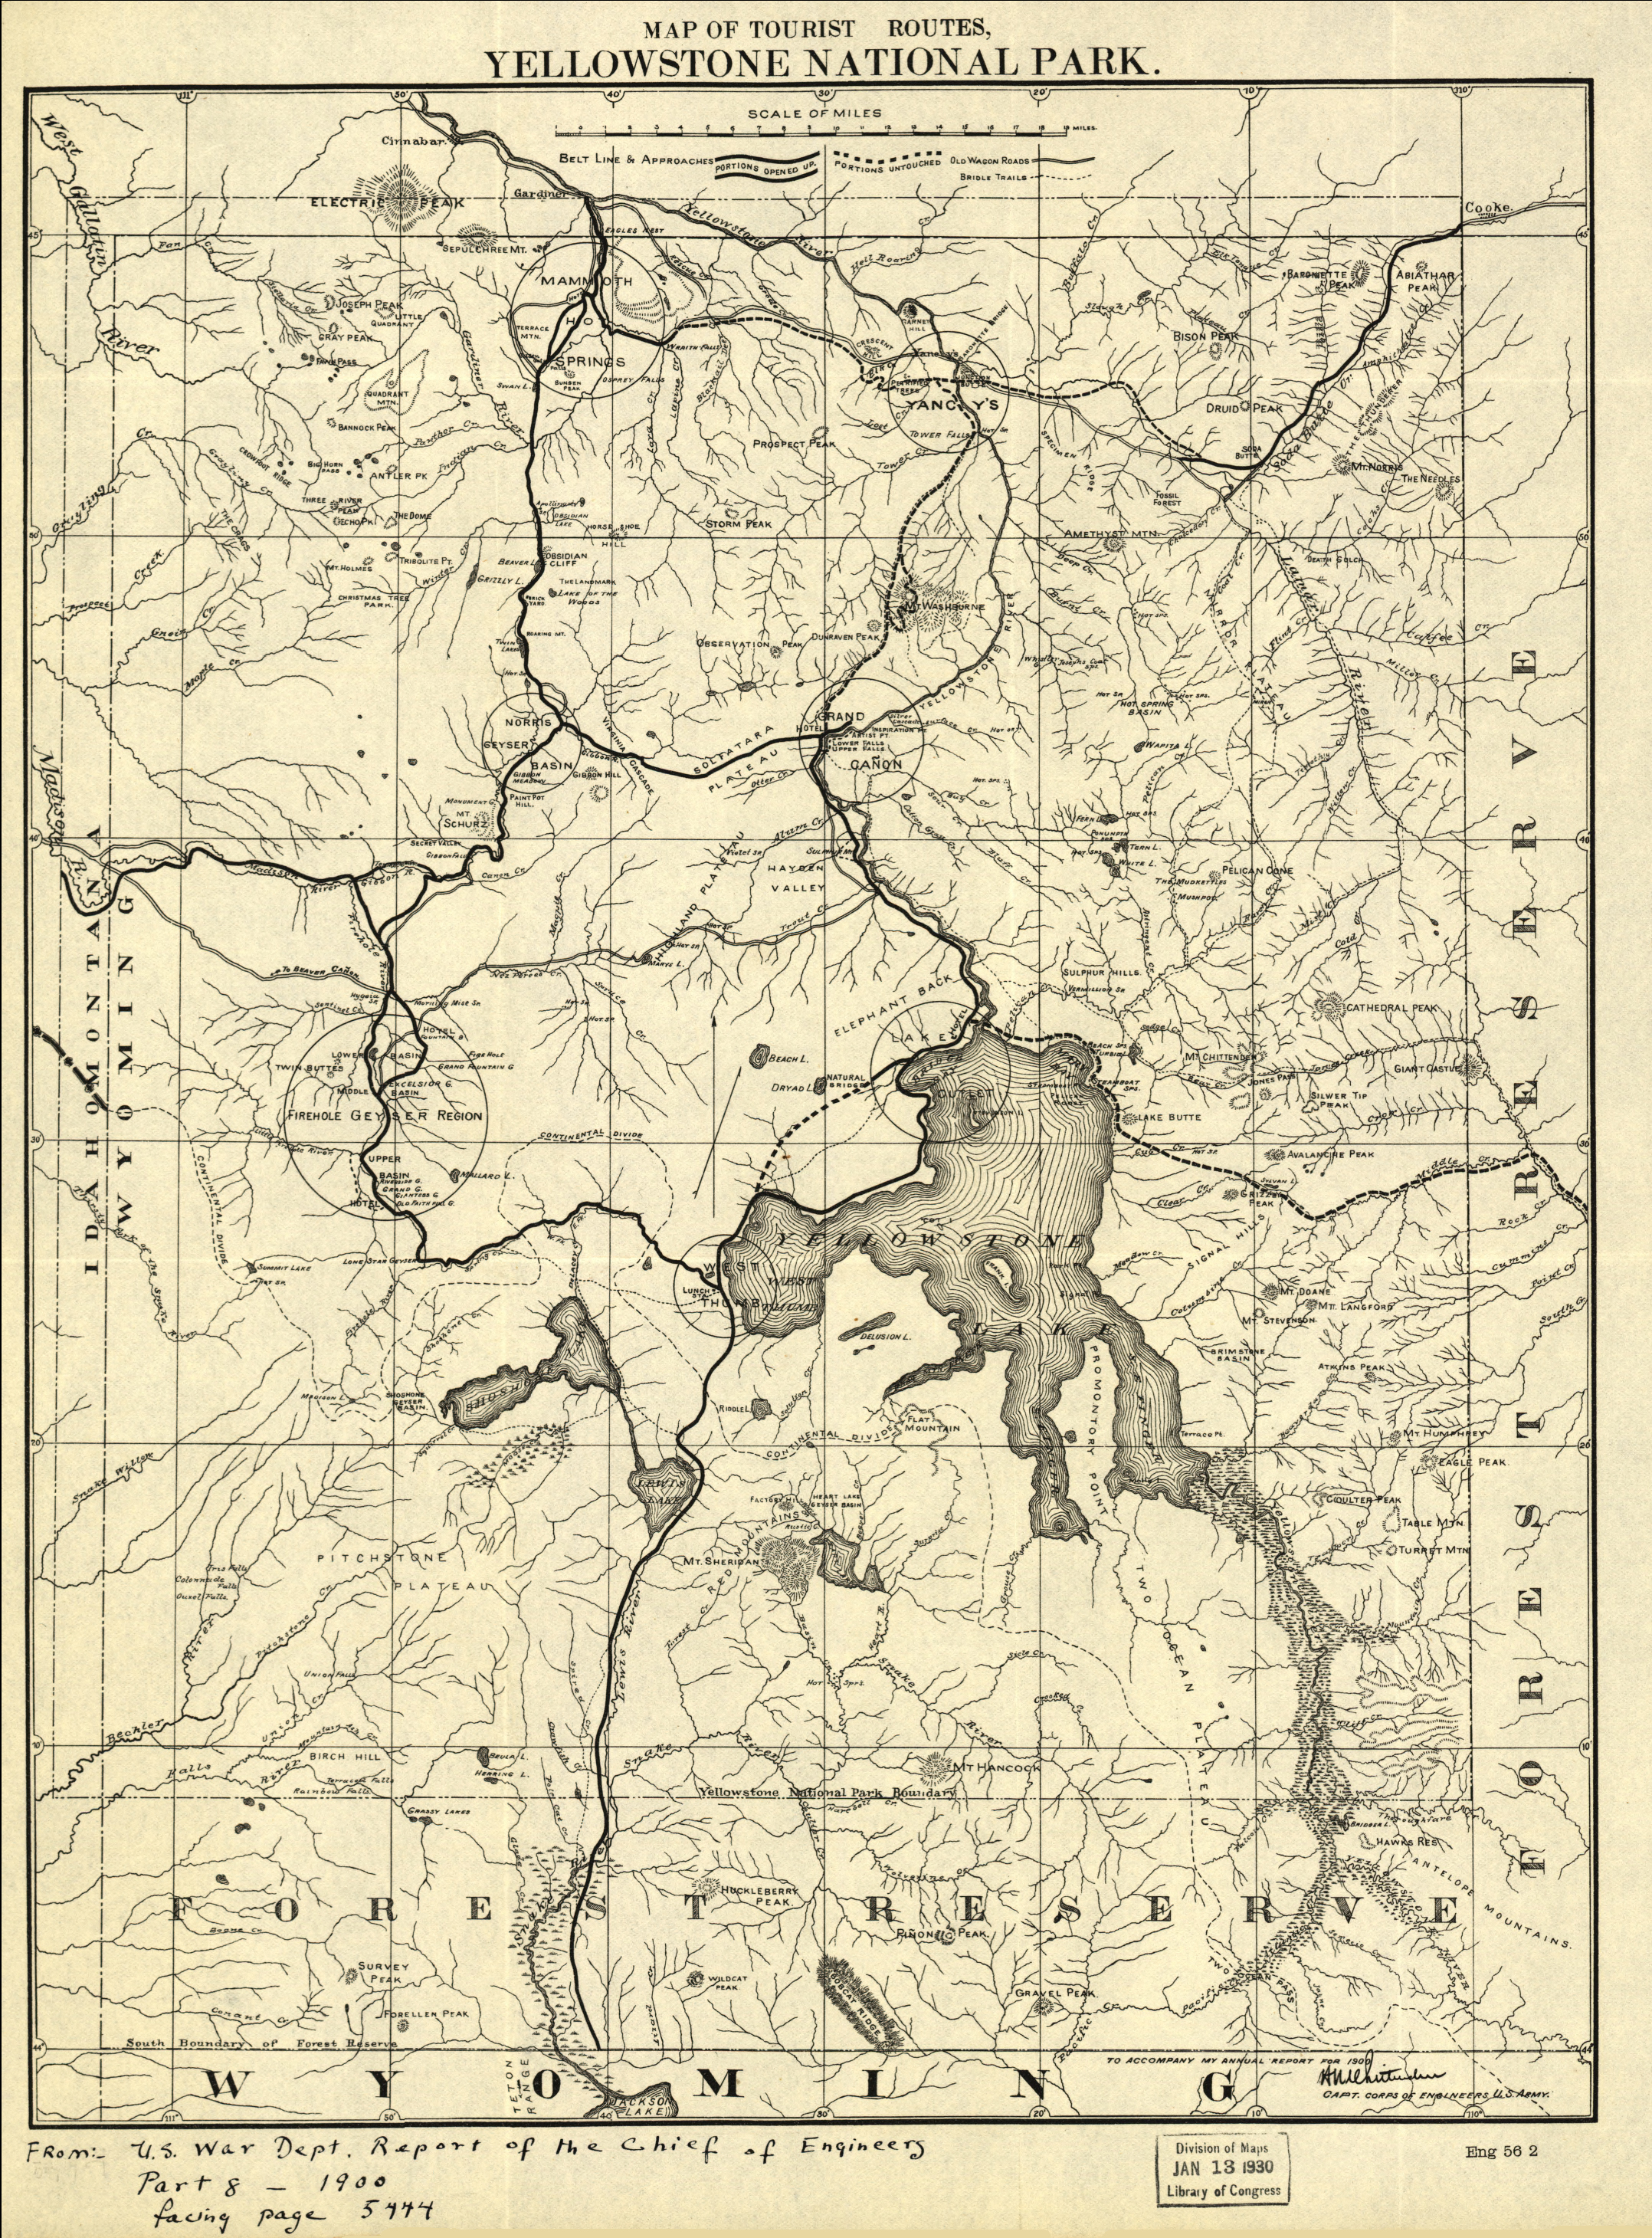 Yellowstone National Park 1900 Tourist Map from the Library of Congress Collection